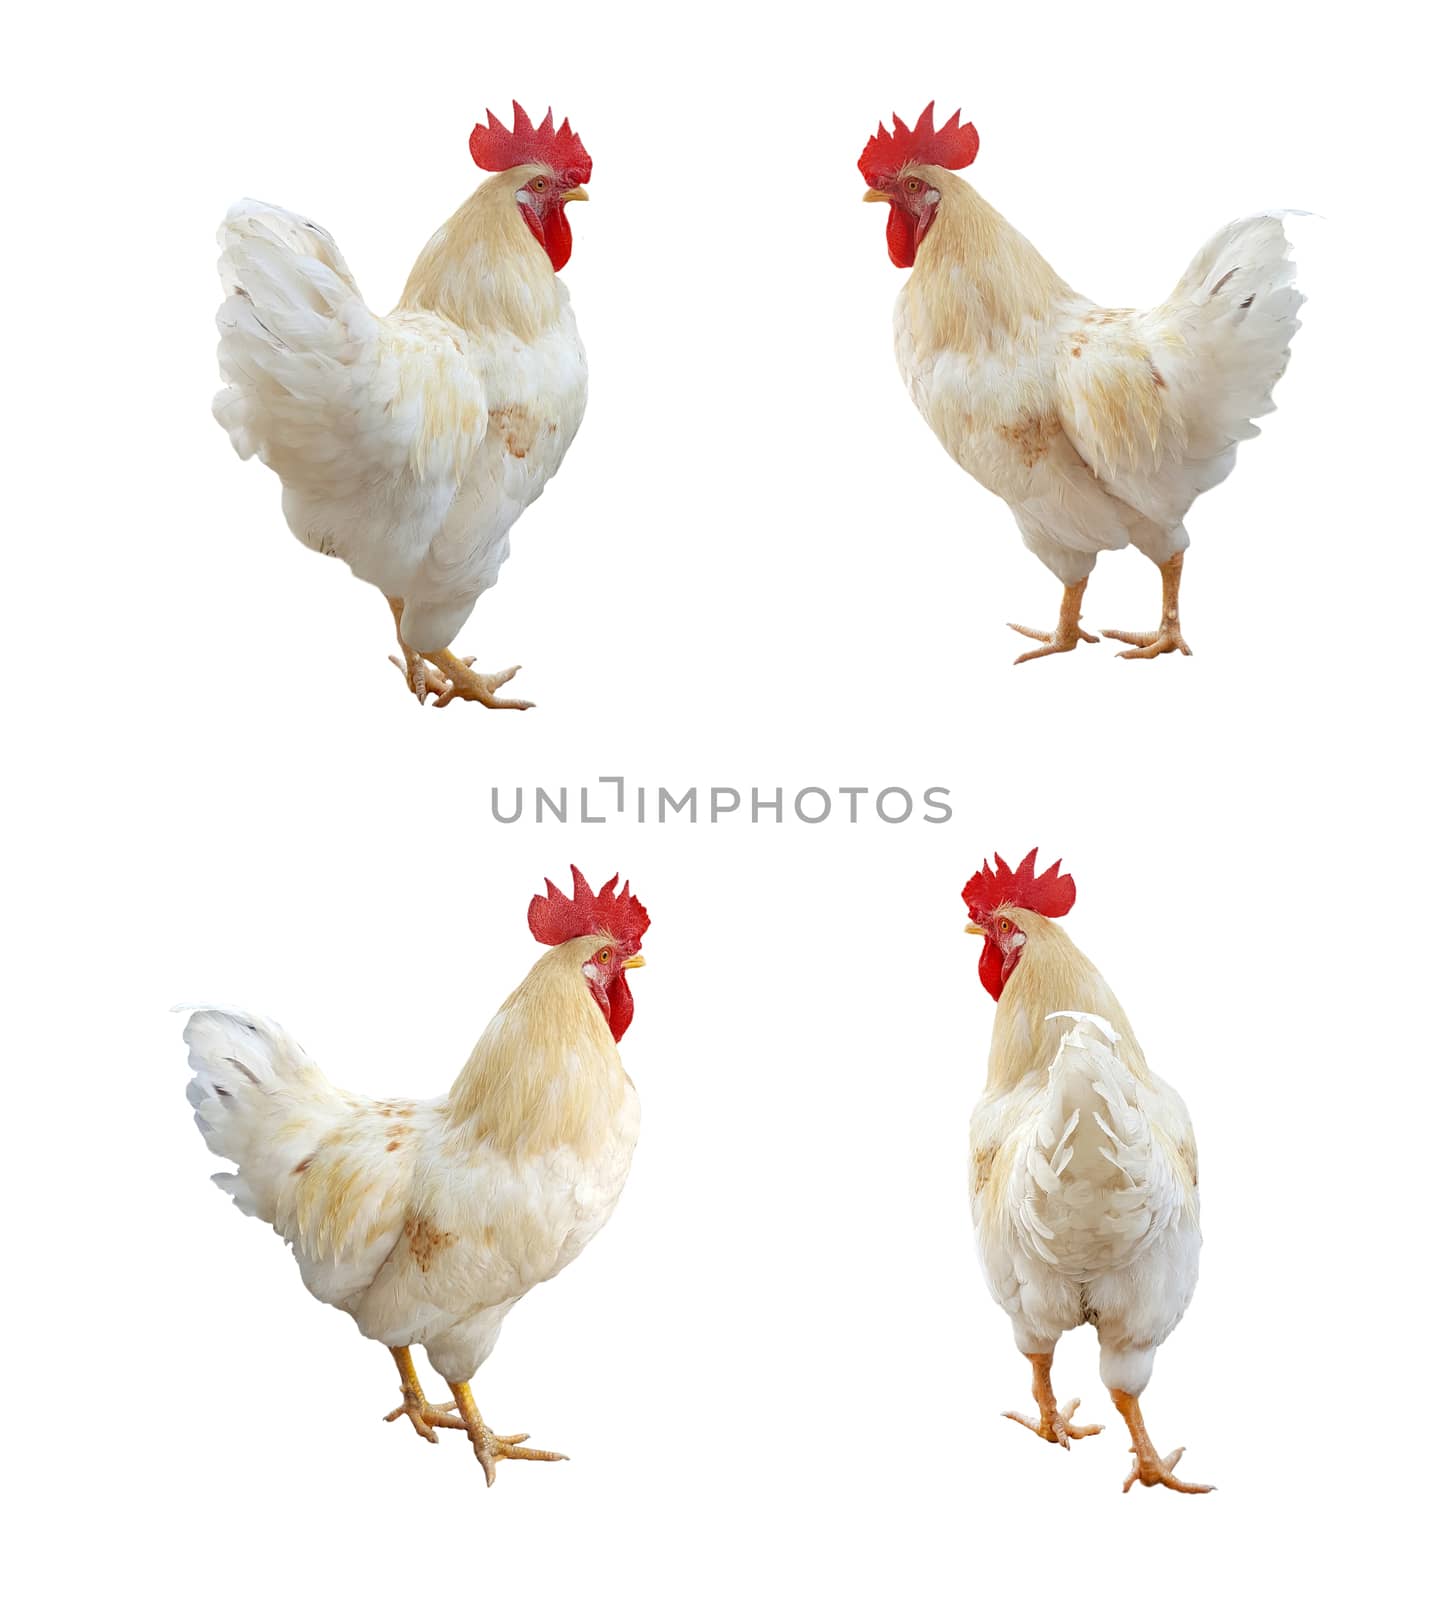 Image of chicken isolated on white background.